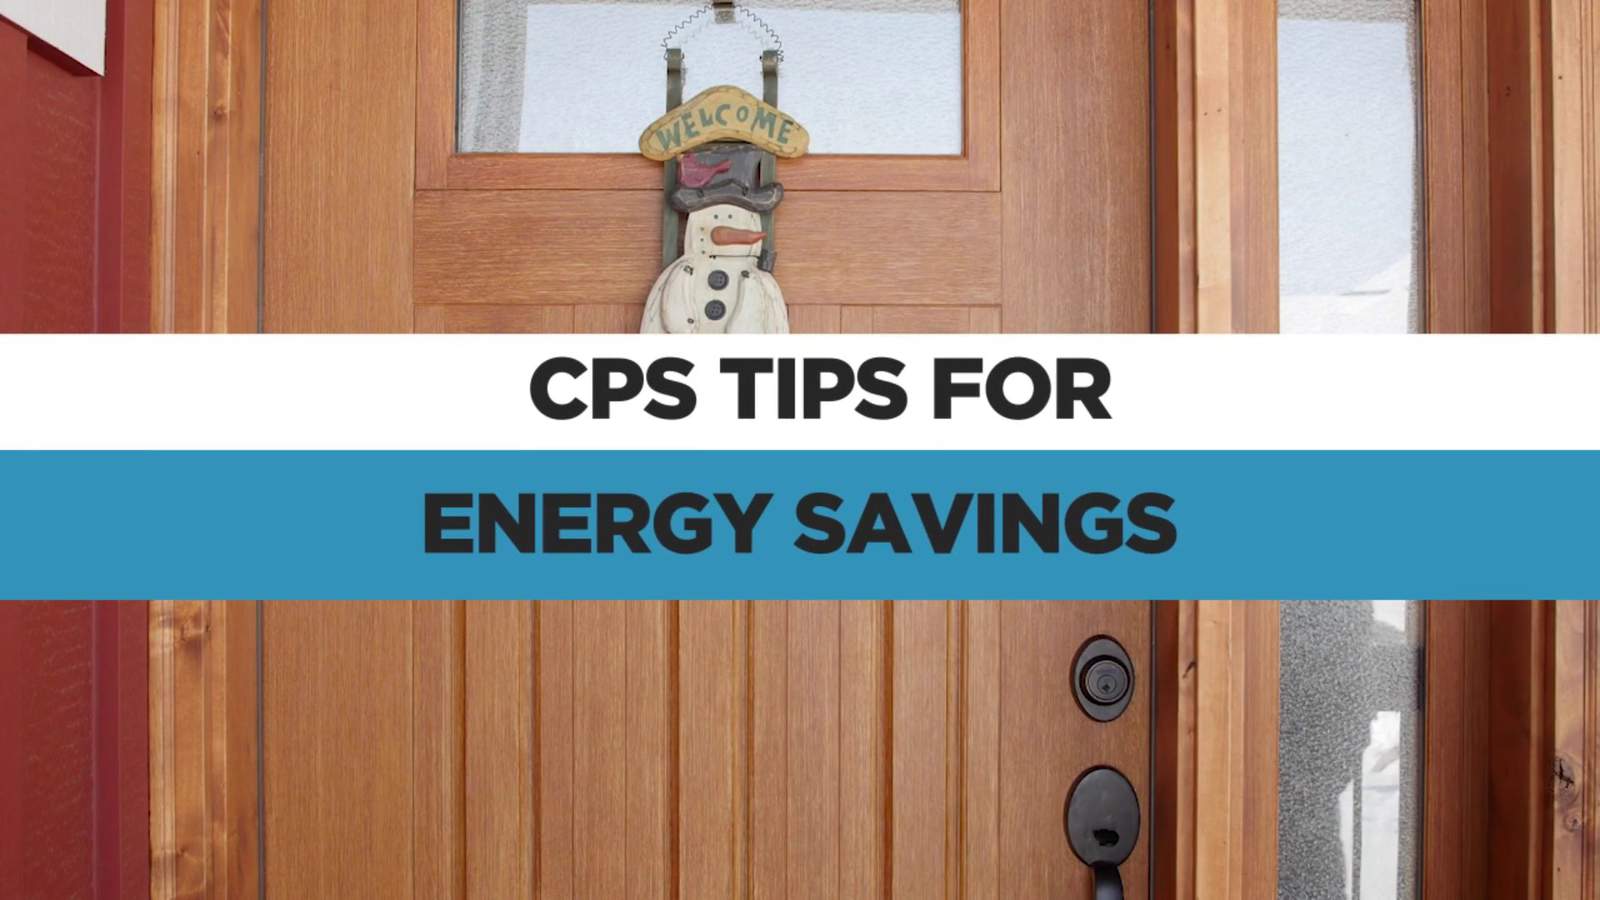 CPS Energy offers tips to save energy during cold front